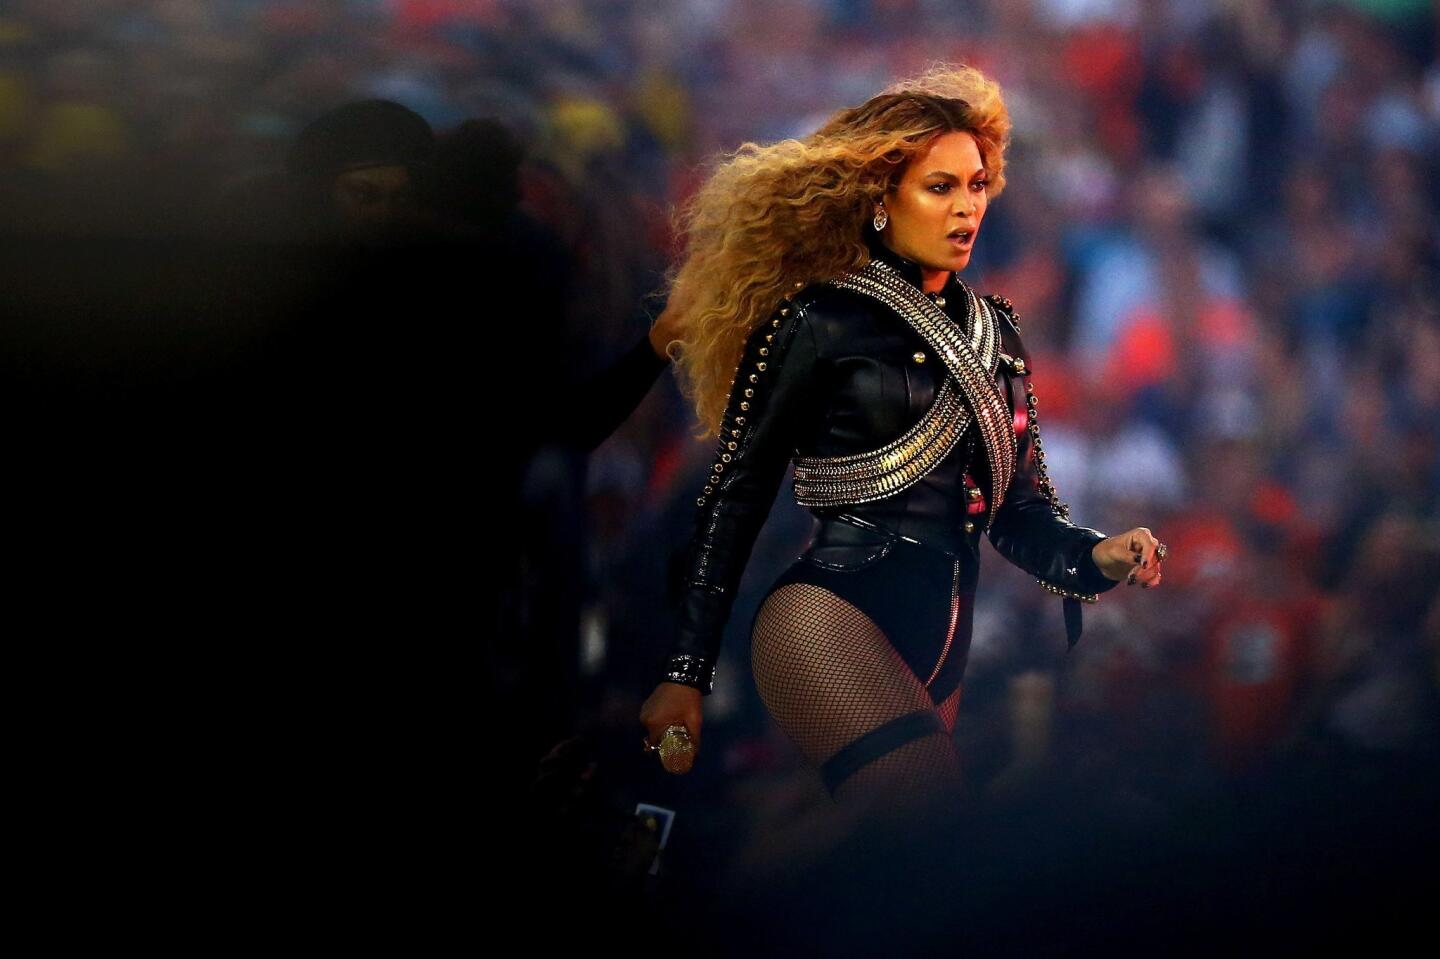 Beyonce performs during the Pepsi Super Bowl 50 Halftime Show at Levi's Stadium on February 7, 2016 in Santa Clara, California. Ronald Martinez/Getty Images